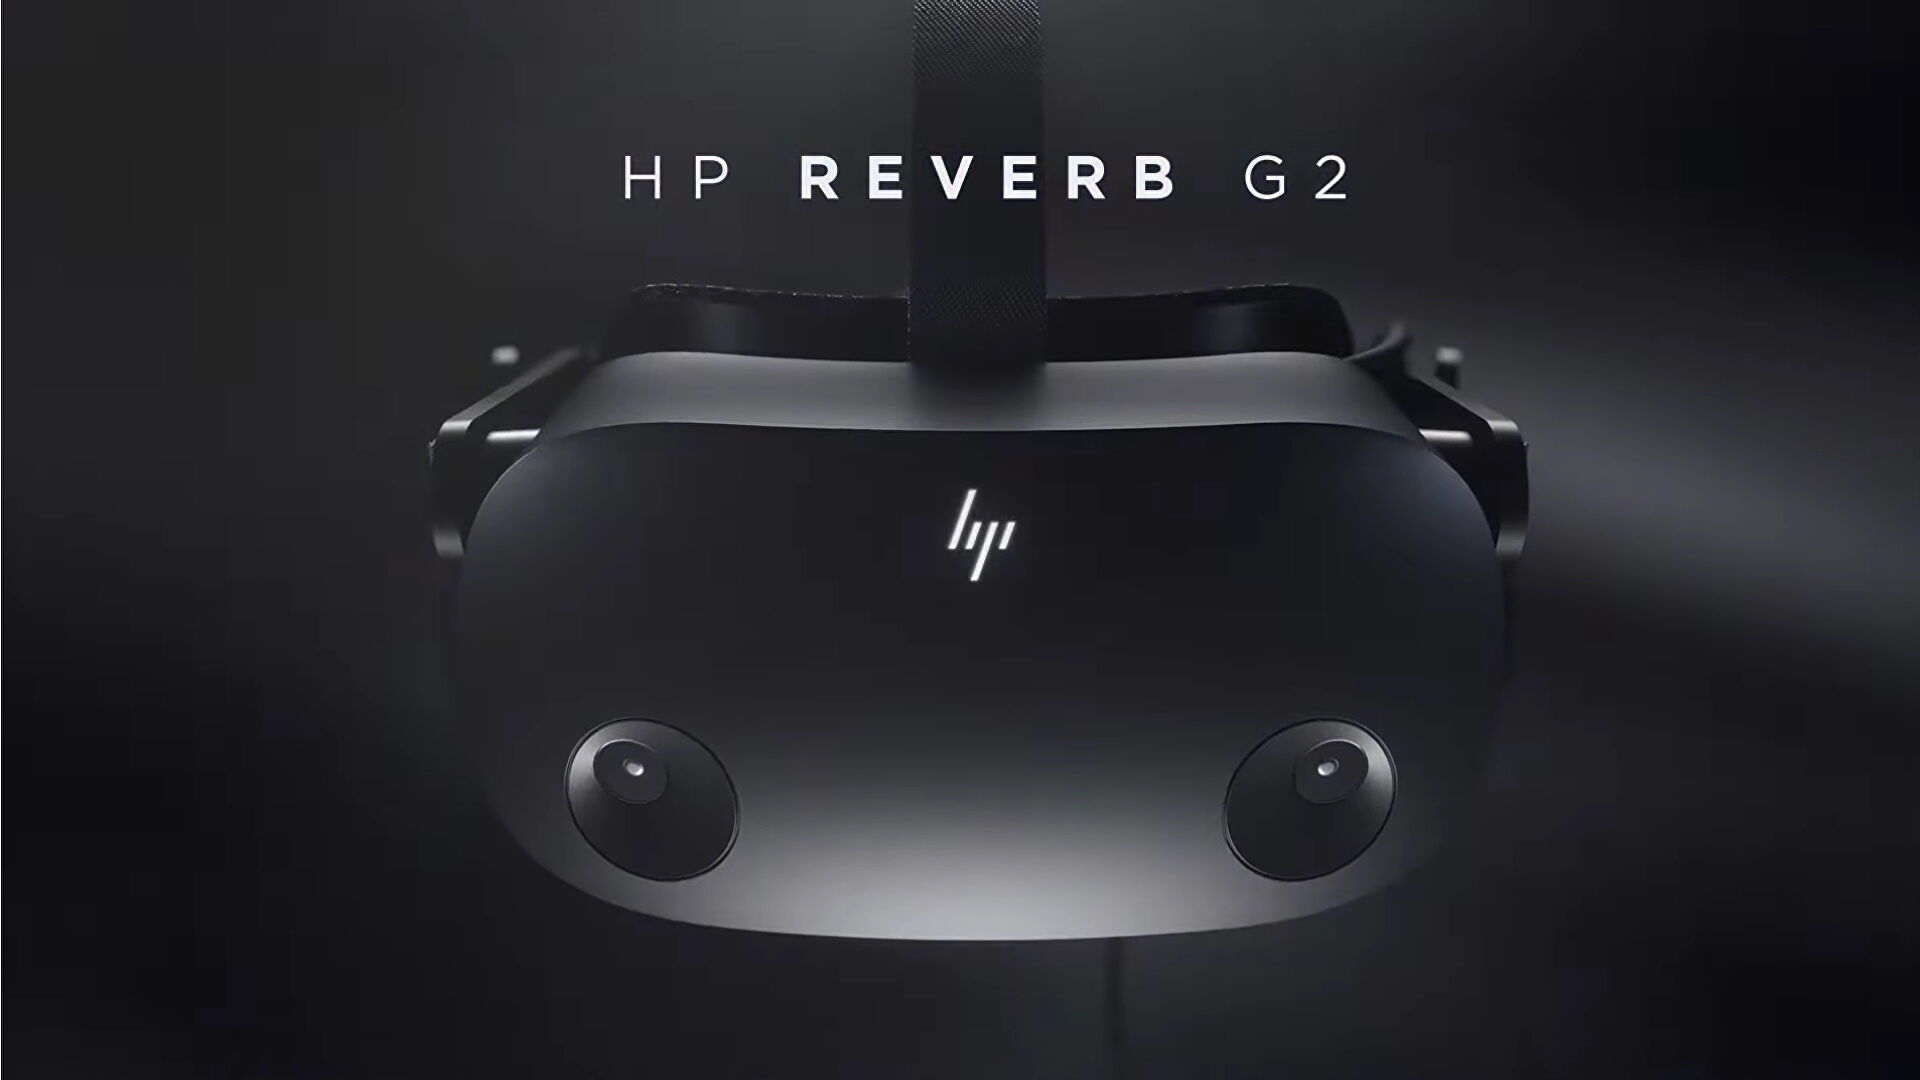 Get the HP Reverb G2 VR headset for $399 after a $200 discount